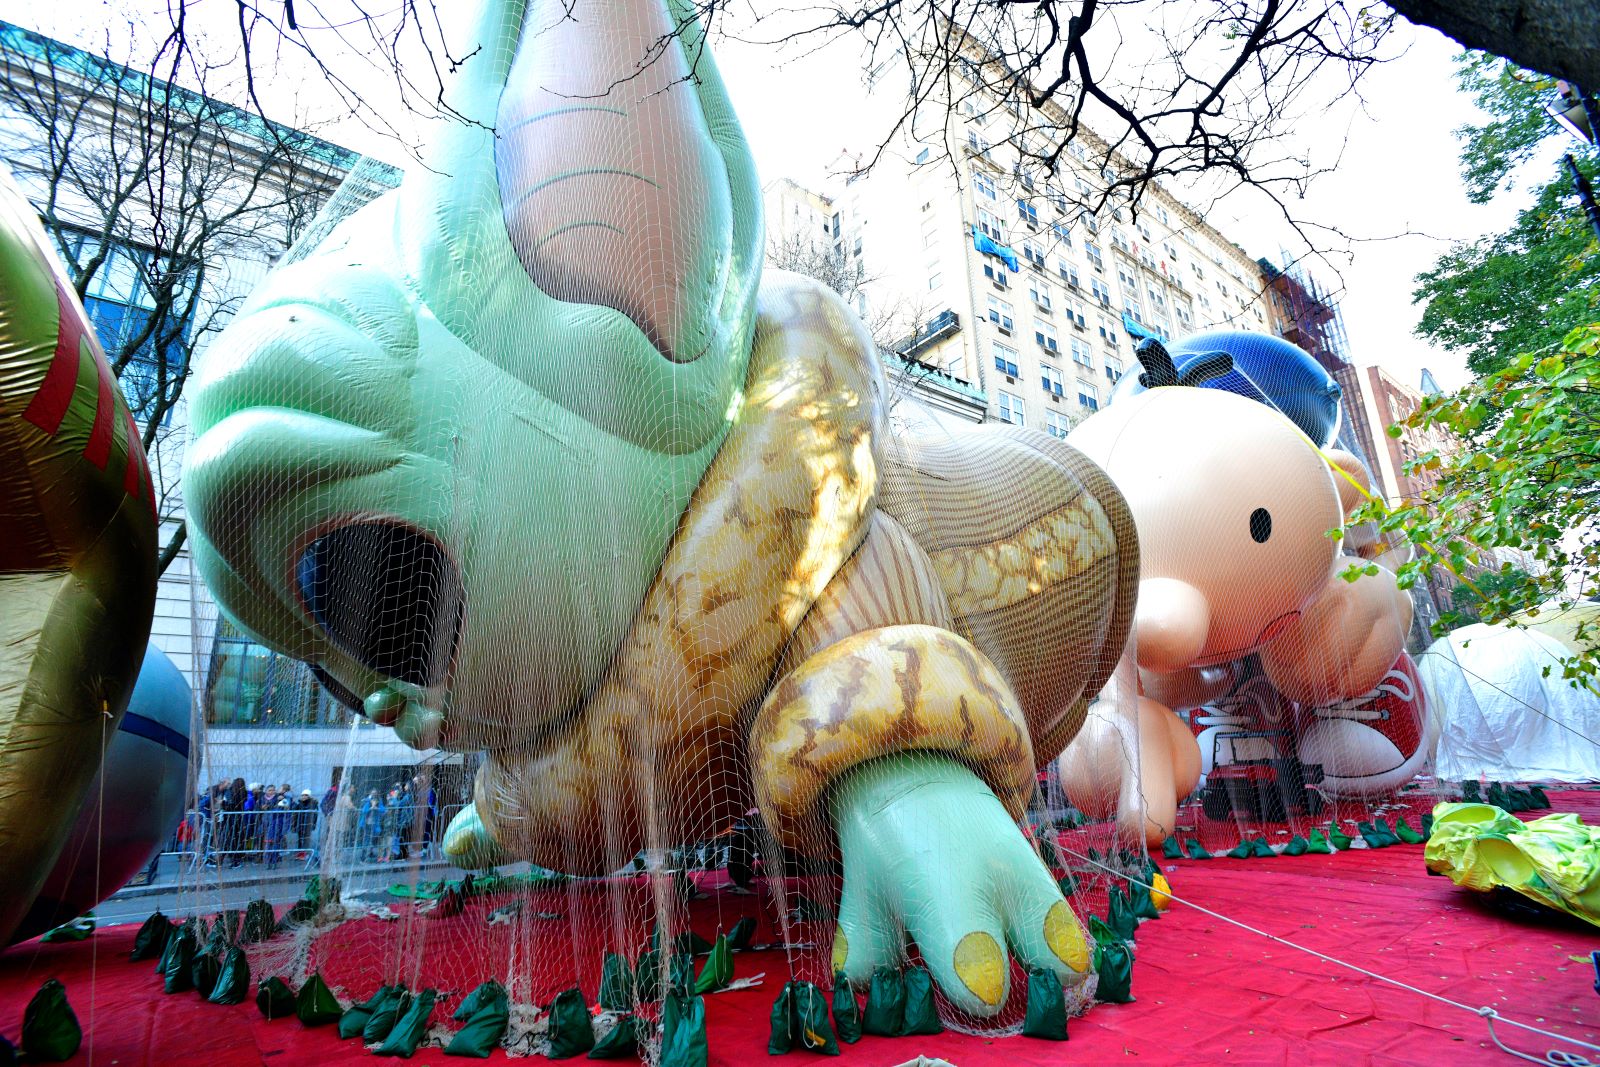 Grogu by Finkois seen during 96th Macy's Thanksgiving Day Parade - Balloon Inflation on November 23, 2022 in New York City. (Photo by Eugene Gologursky/Getty Images for Macy's, Inc.)